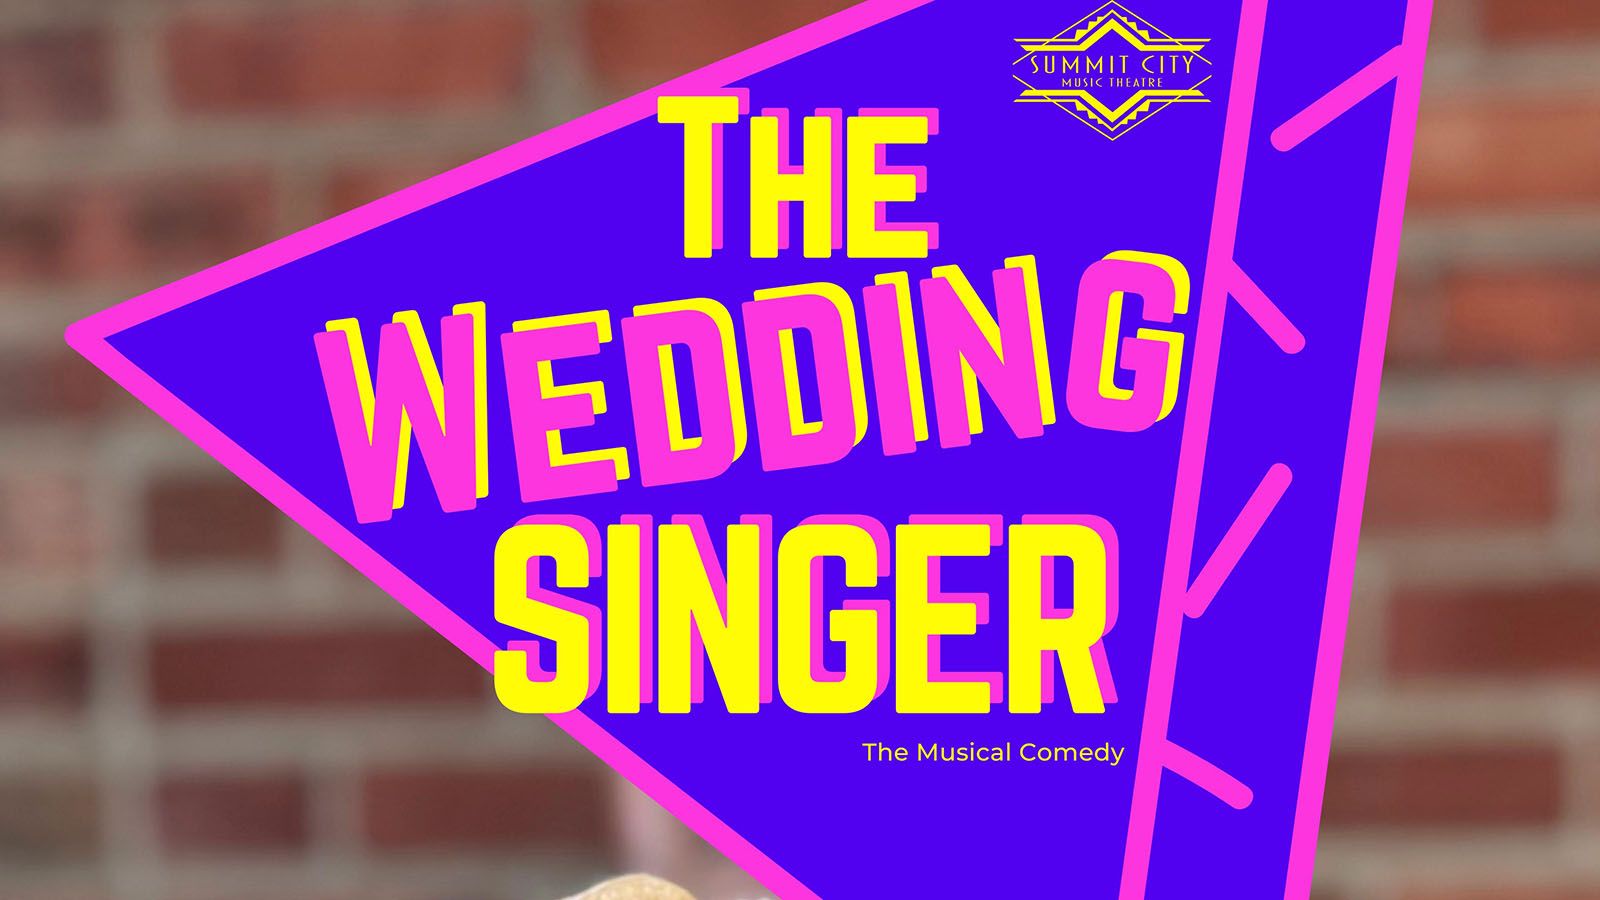 Summit City Music Theatre will perform "The Wedding Singer" at The Charles between Feb. 24 and March 5.